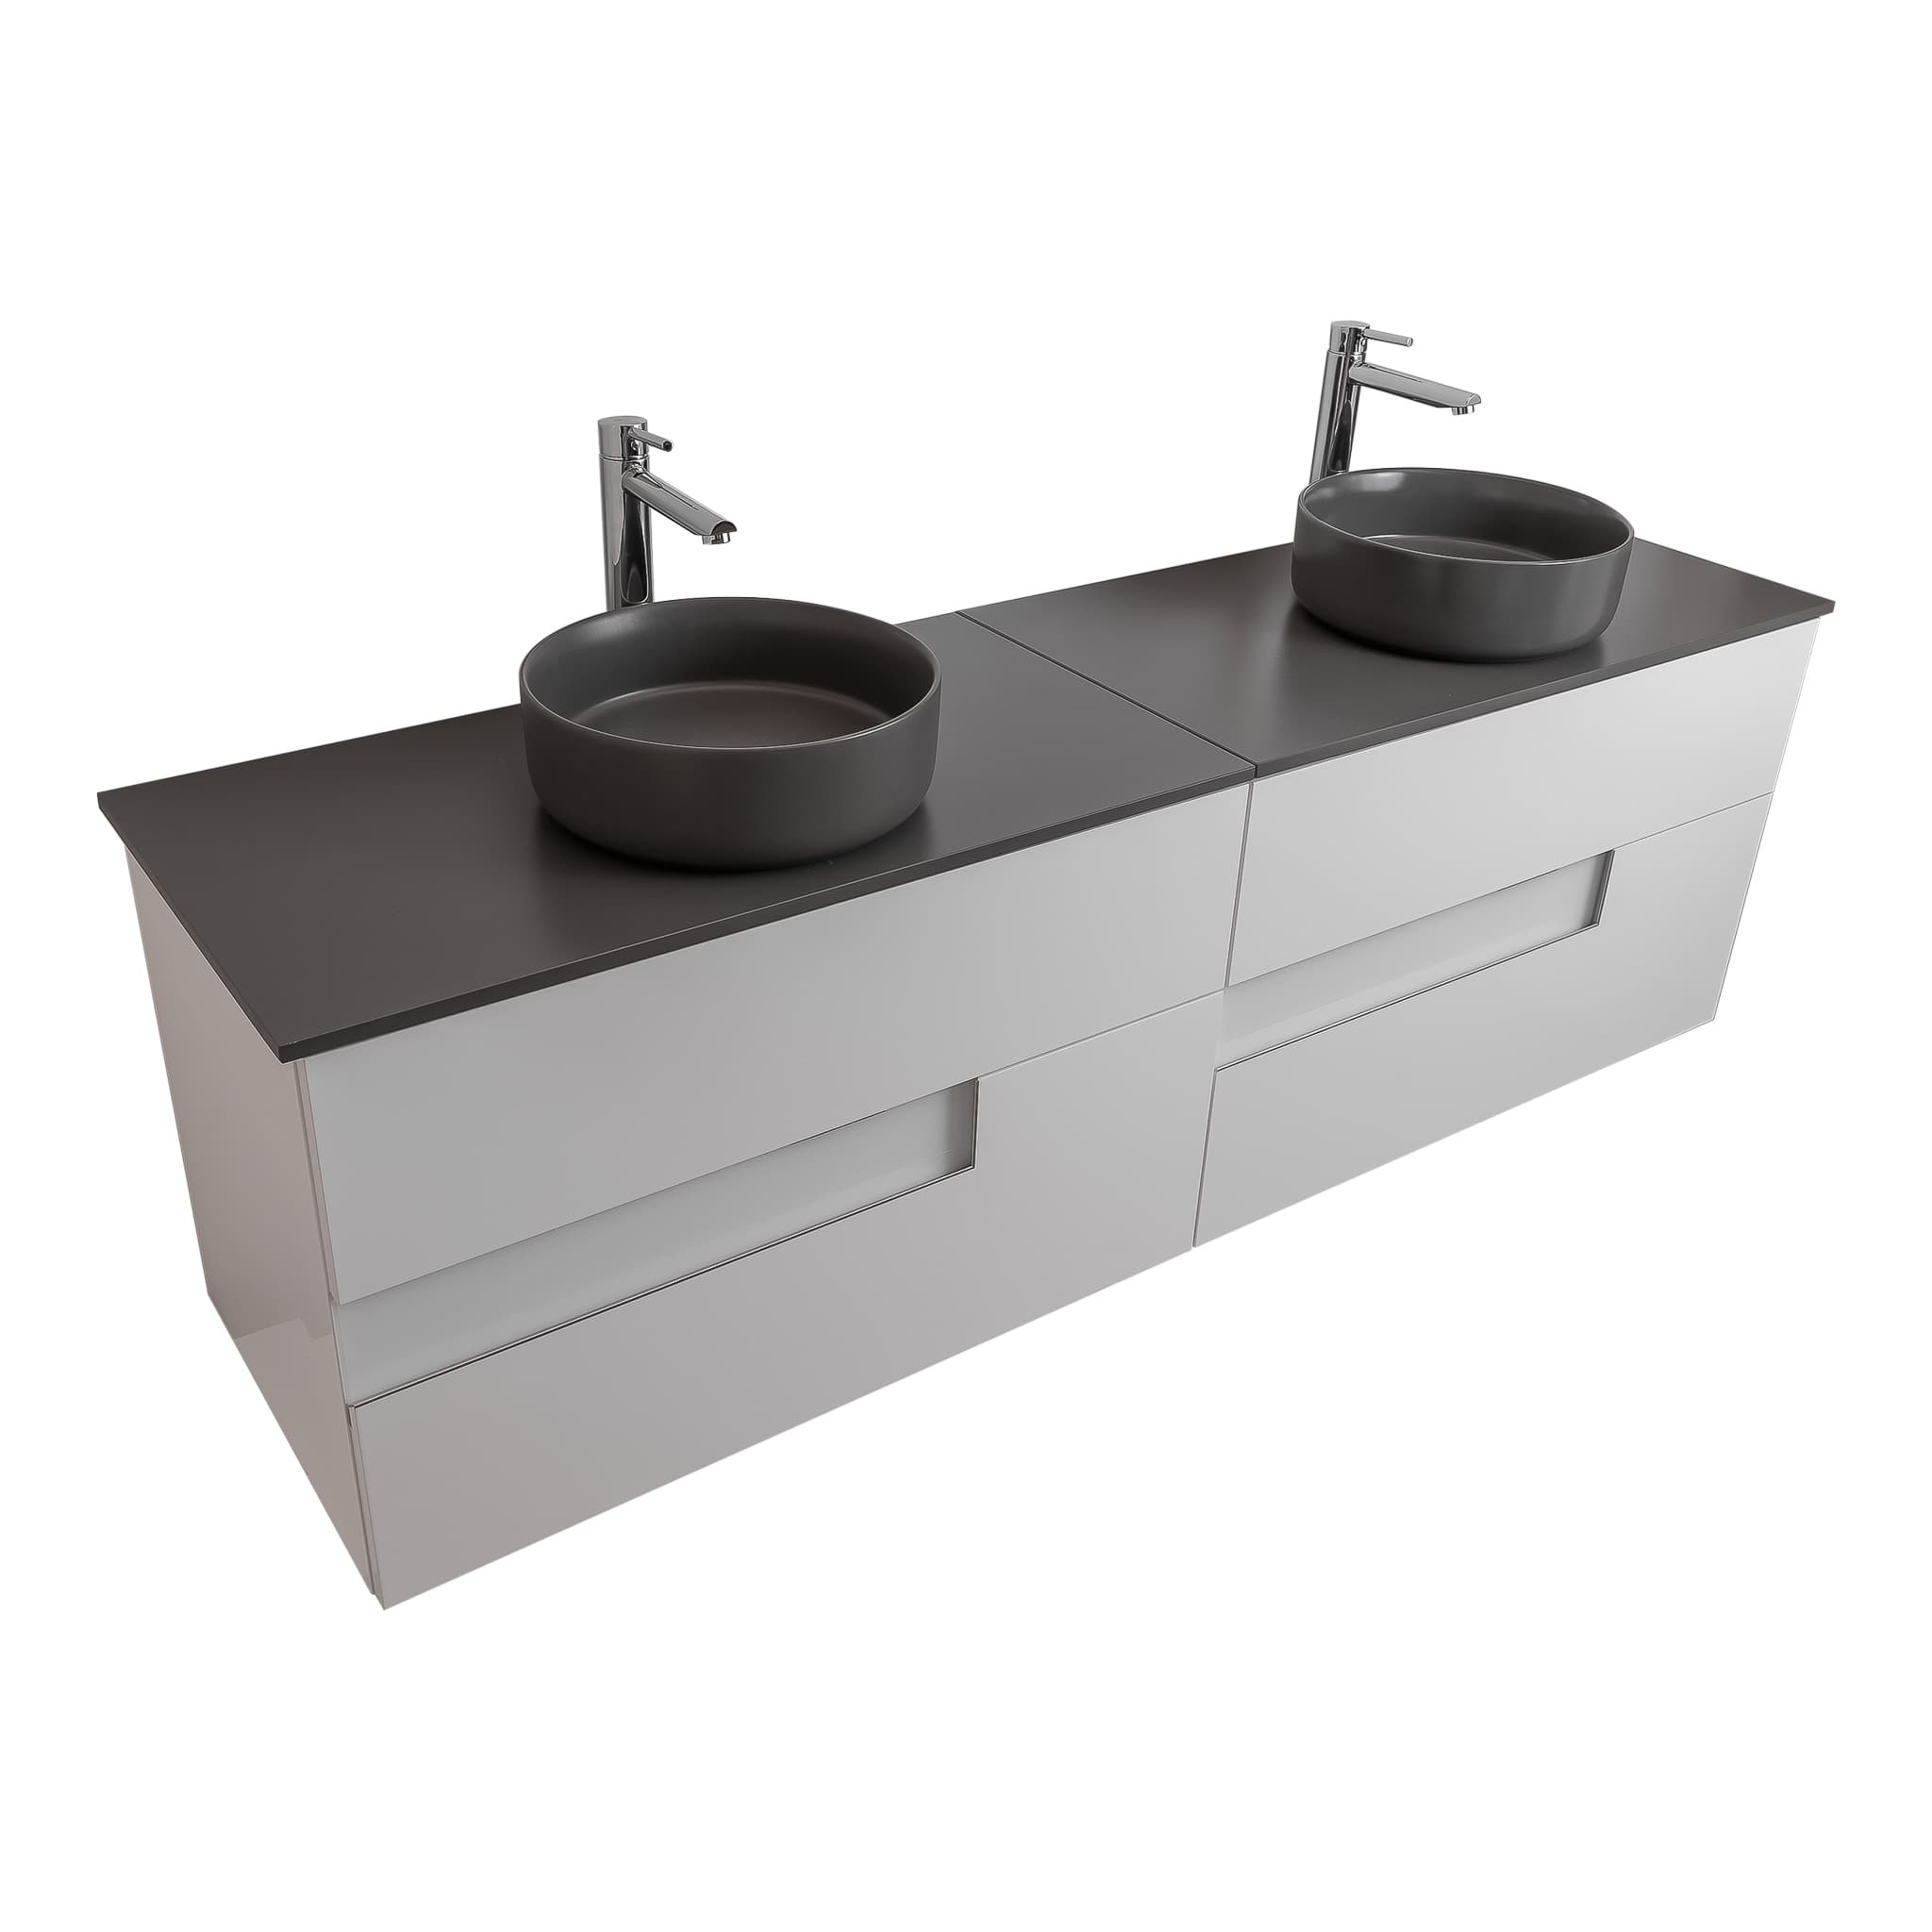 Vision 63 White High Gloss Cabinet, Ares Grey Ceniza Top And Two Ares Grey Ceniza Ceramic Basin, Wall Mounted Modern Vanity Set